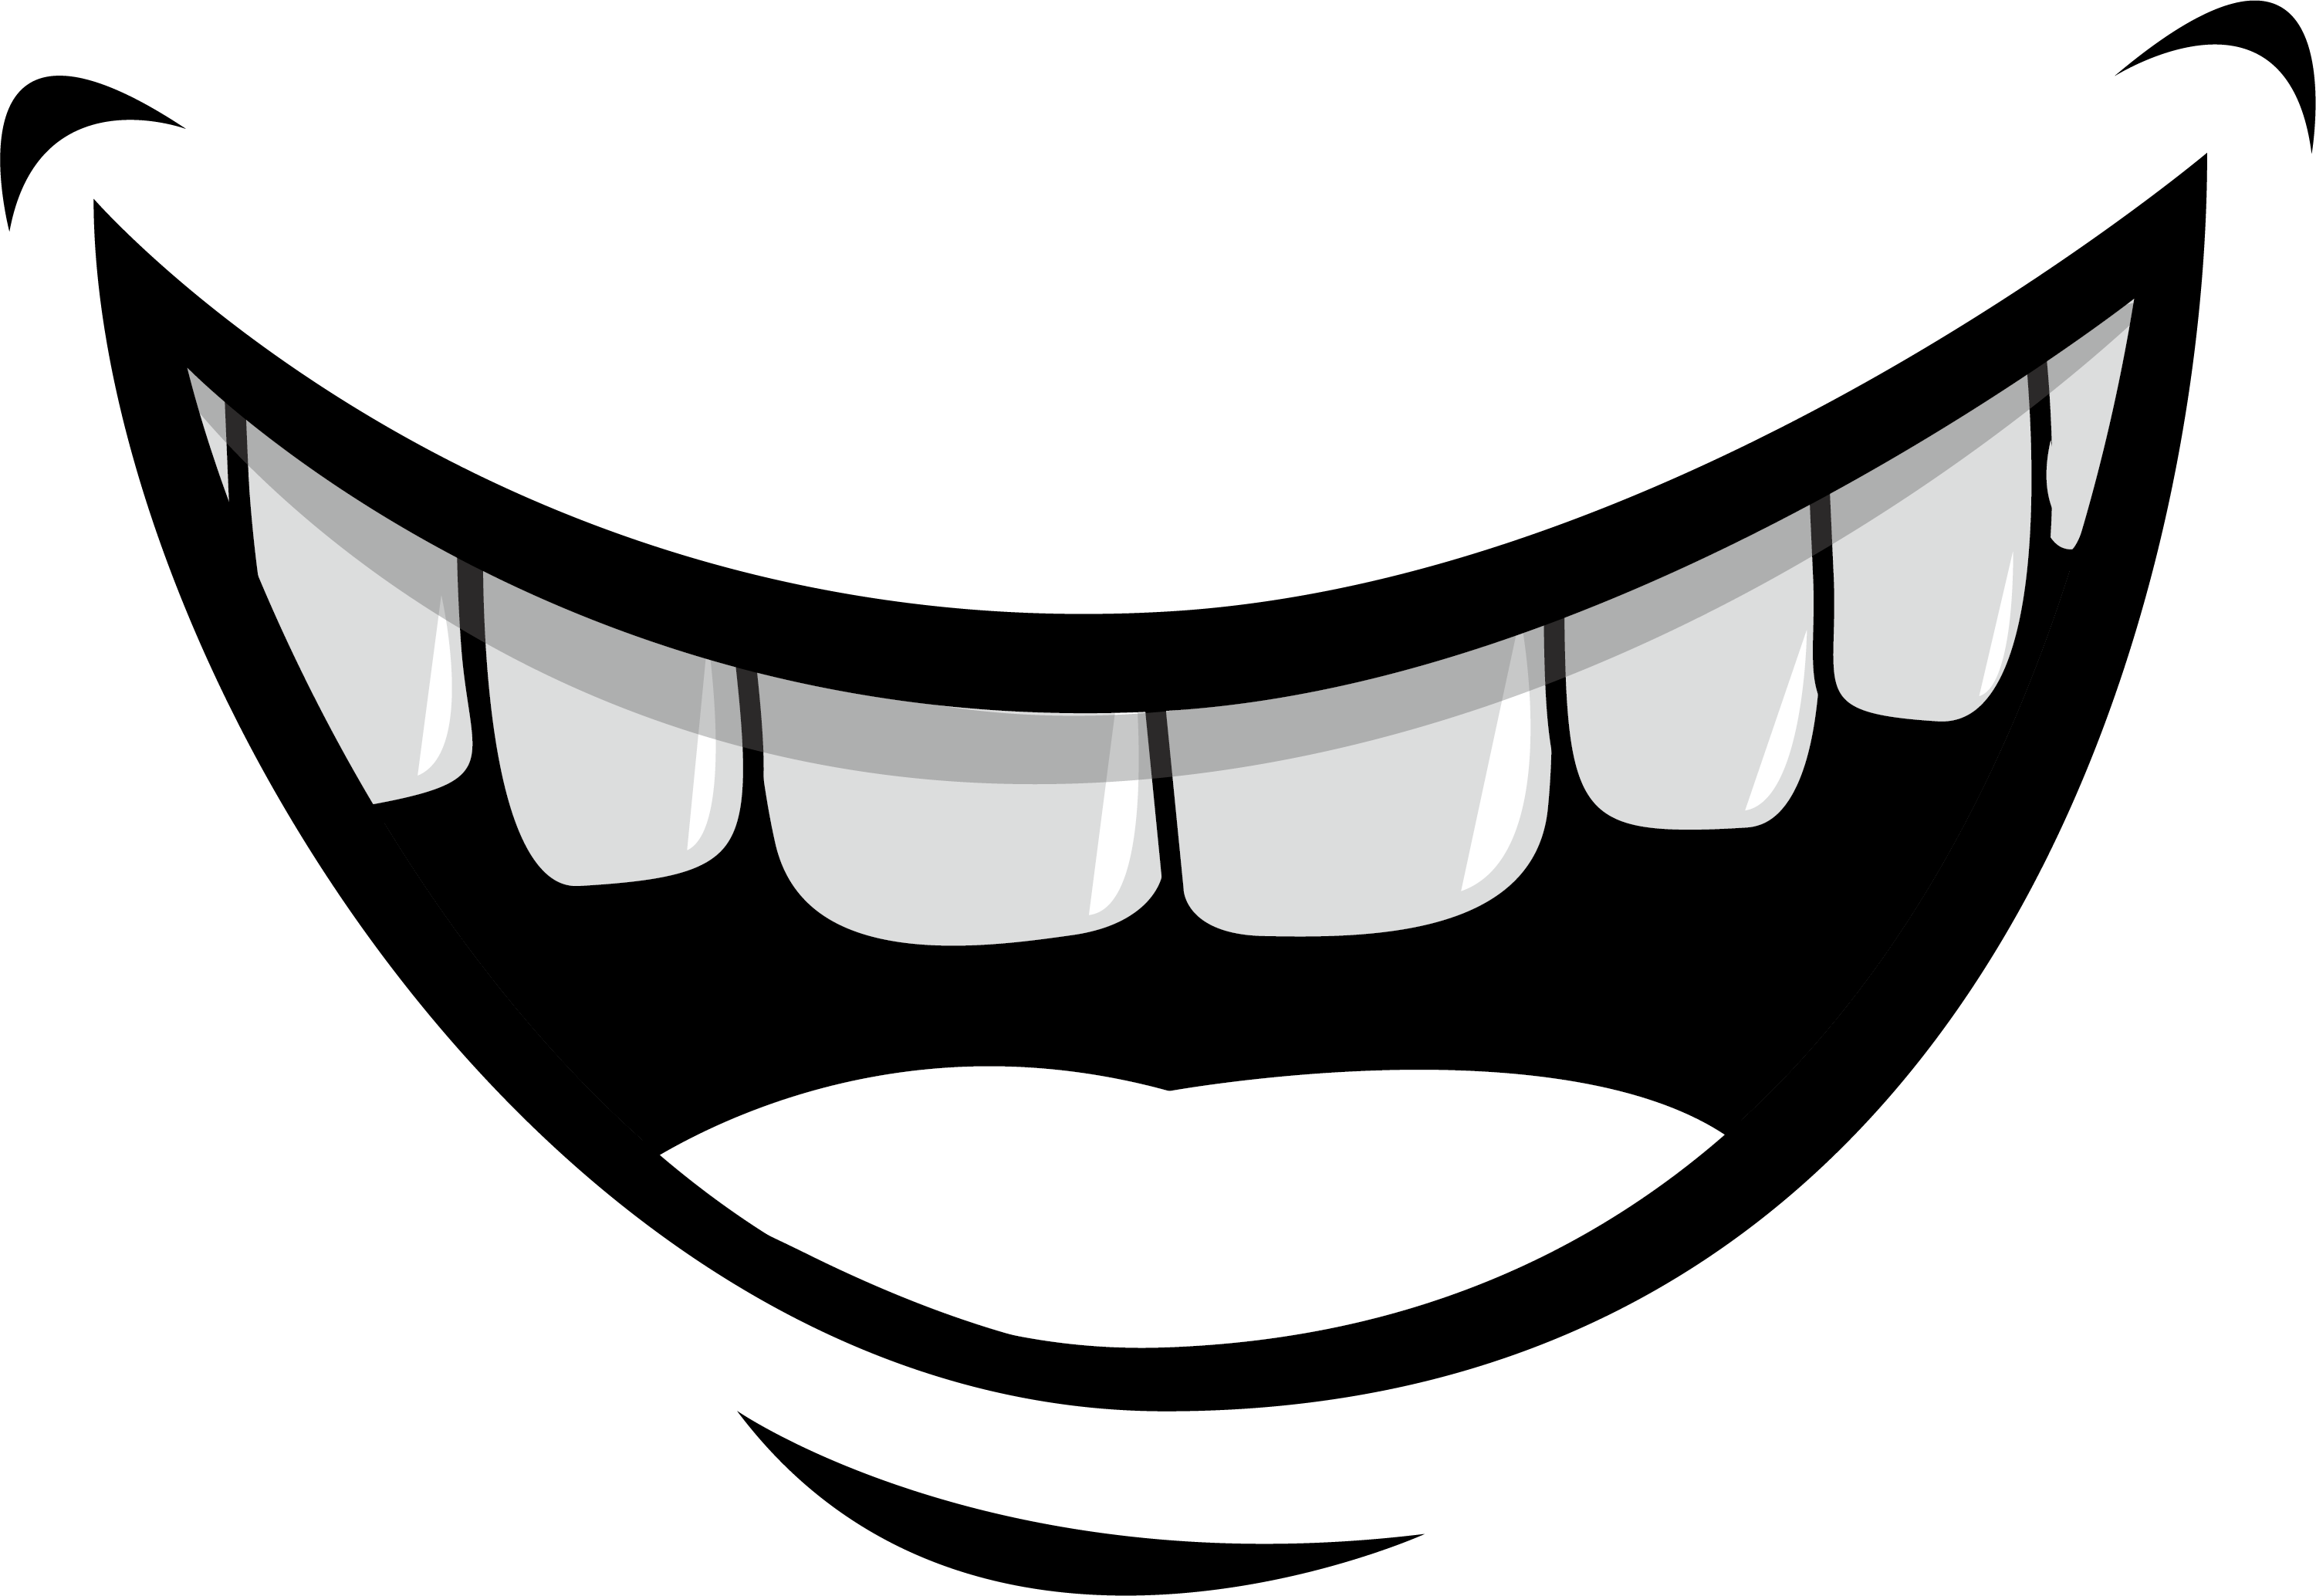 Lip tooth illustration creative. Smiley clipart mouth